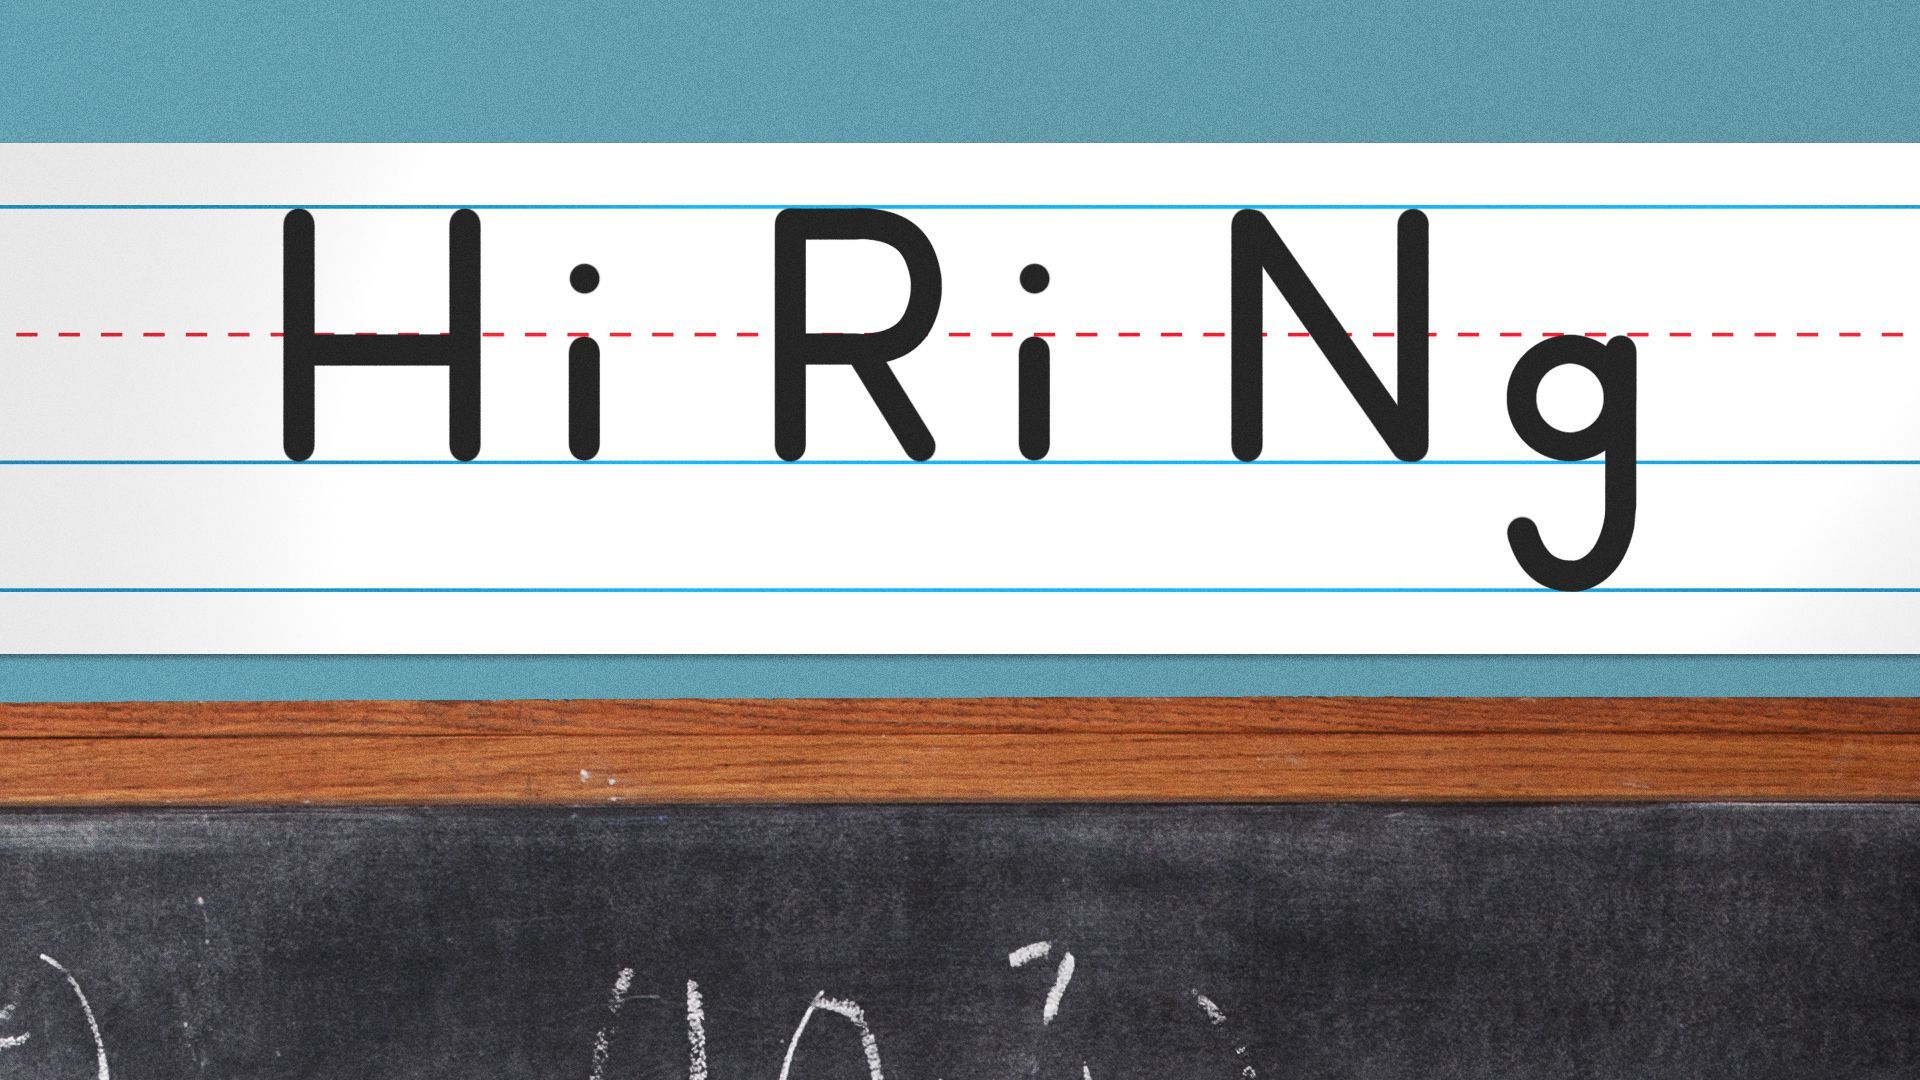 A handwriting alphabet above the chalkboard spells out "Hiring."